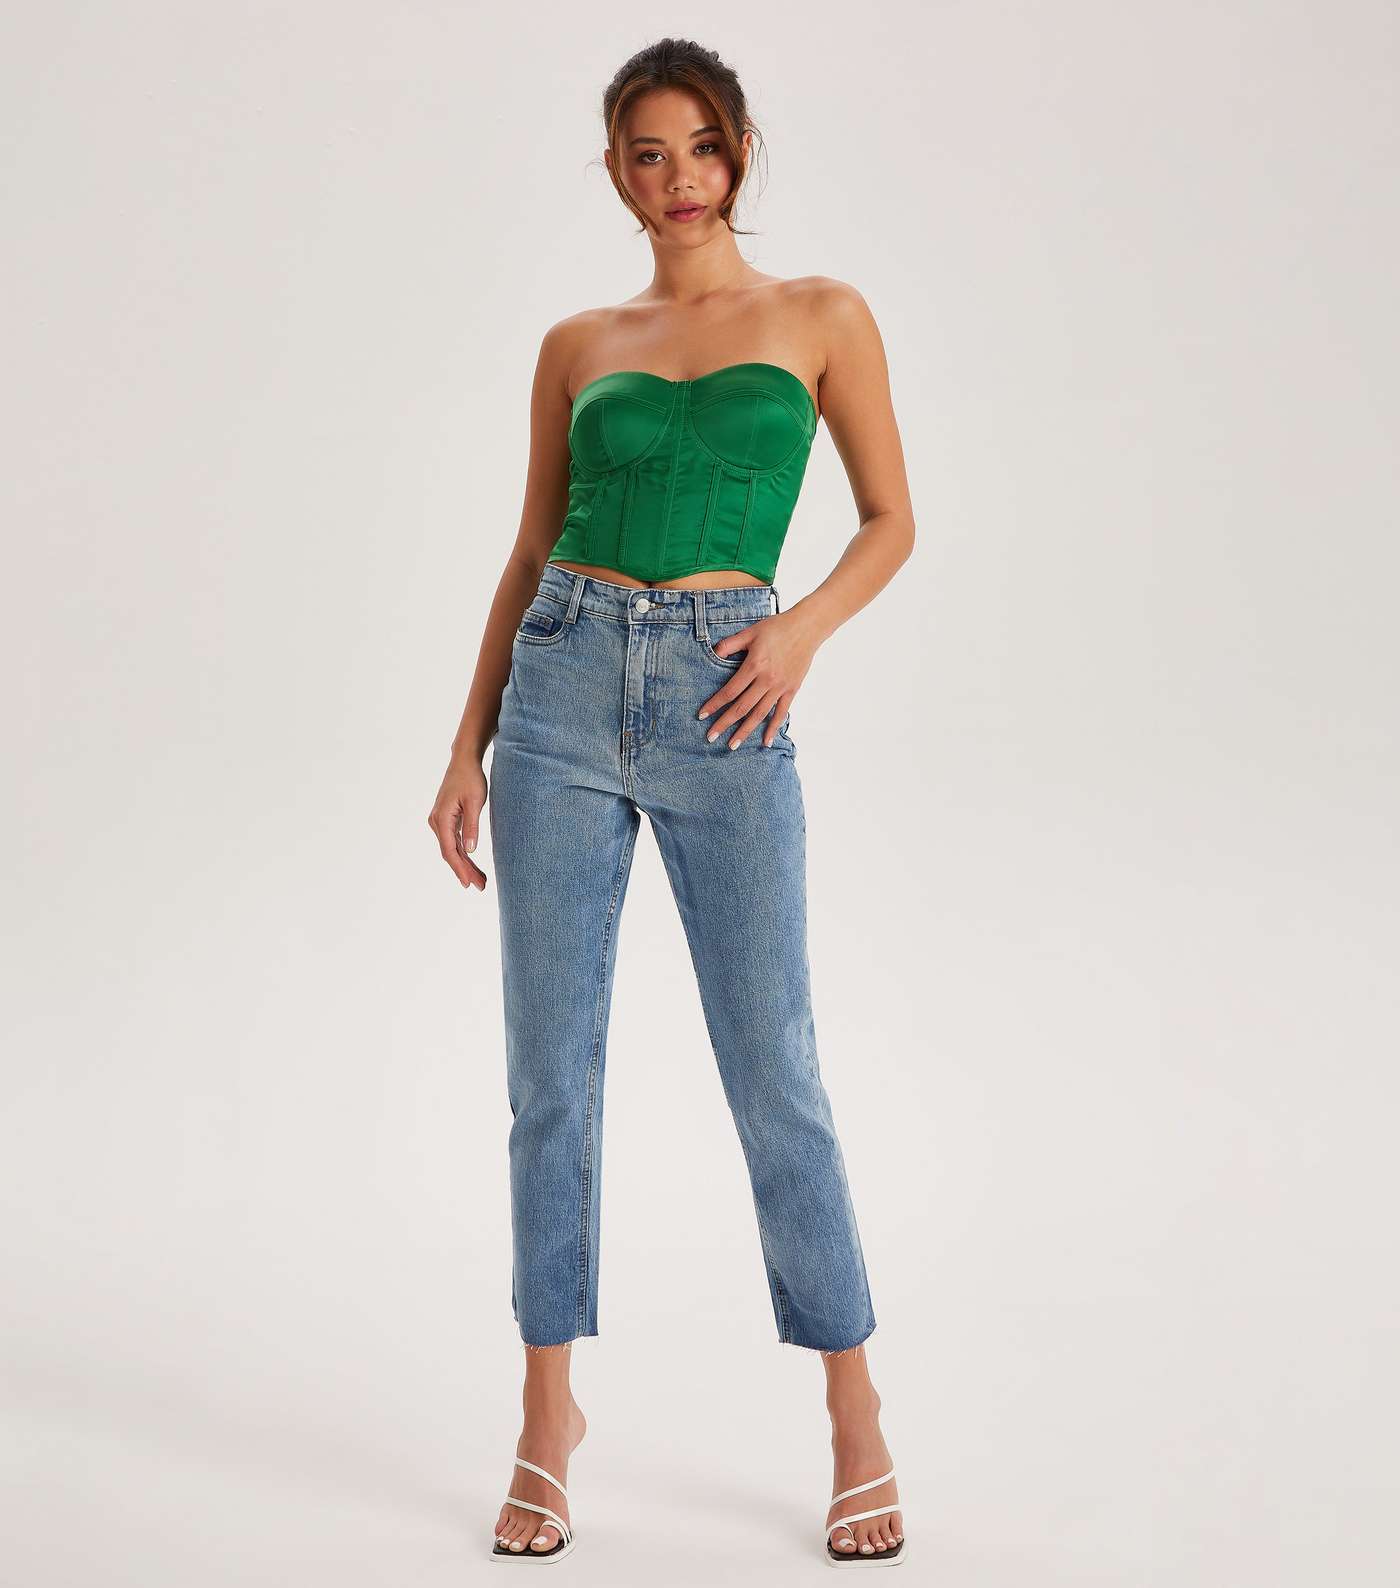 Satin corset top forest green  Trendy Tops - Lush Fashion Lounge